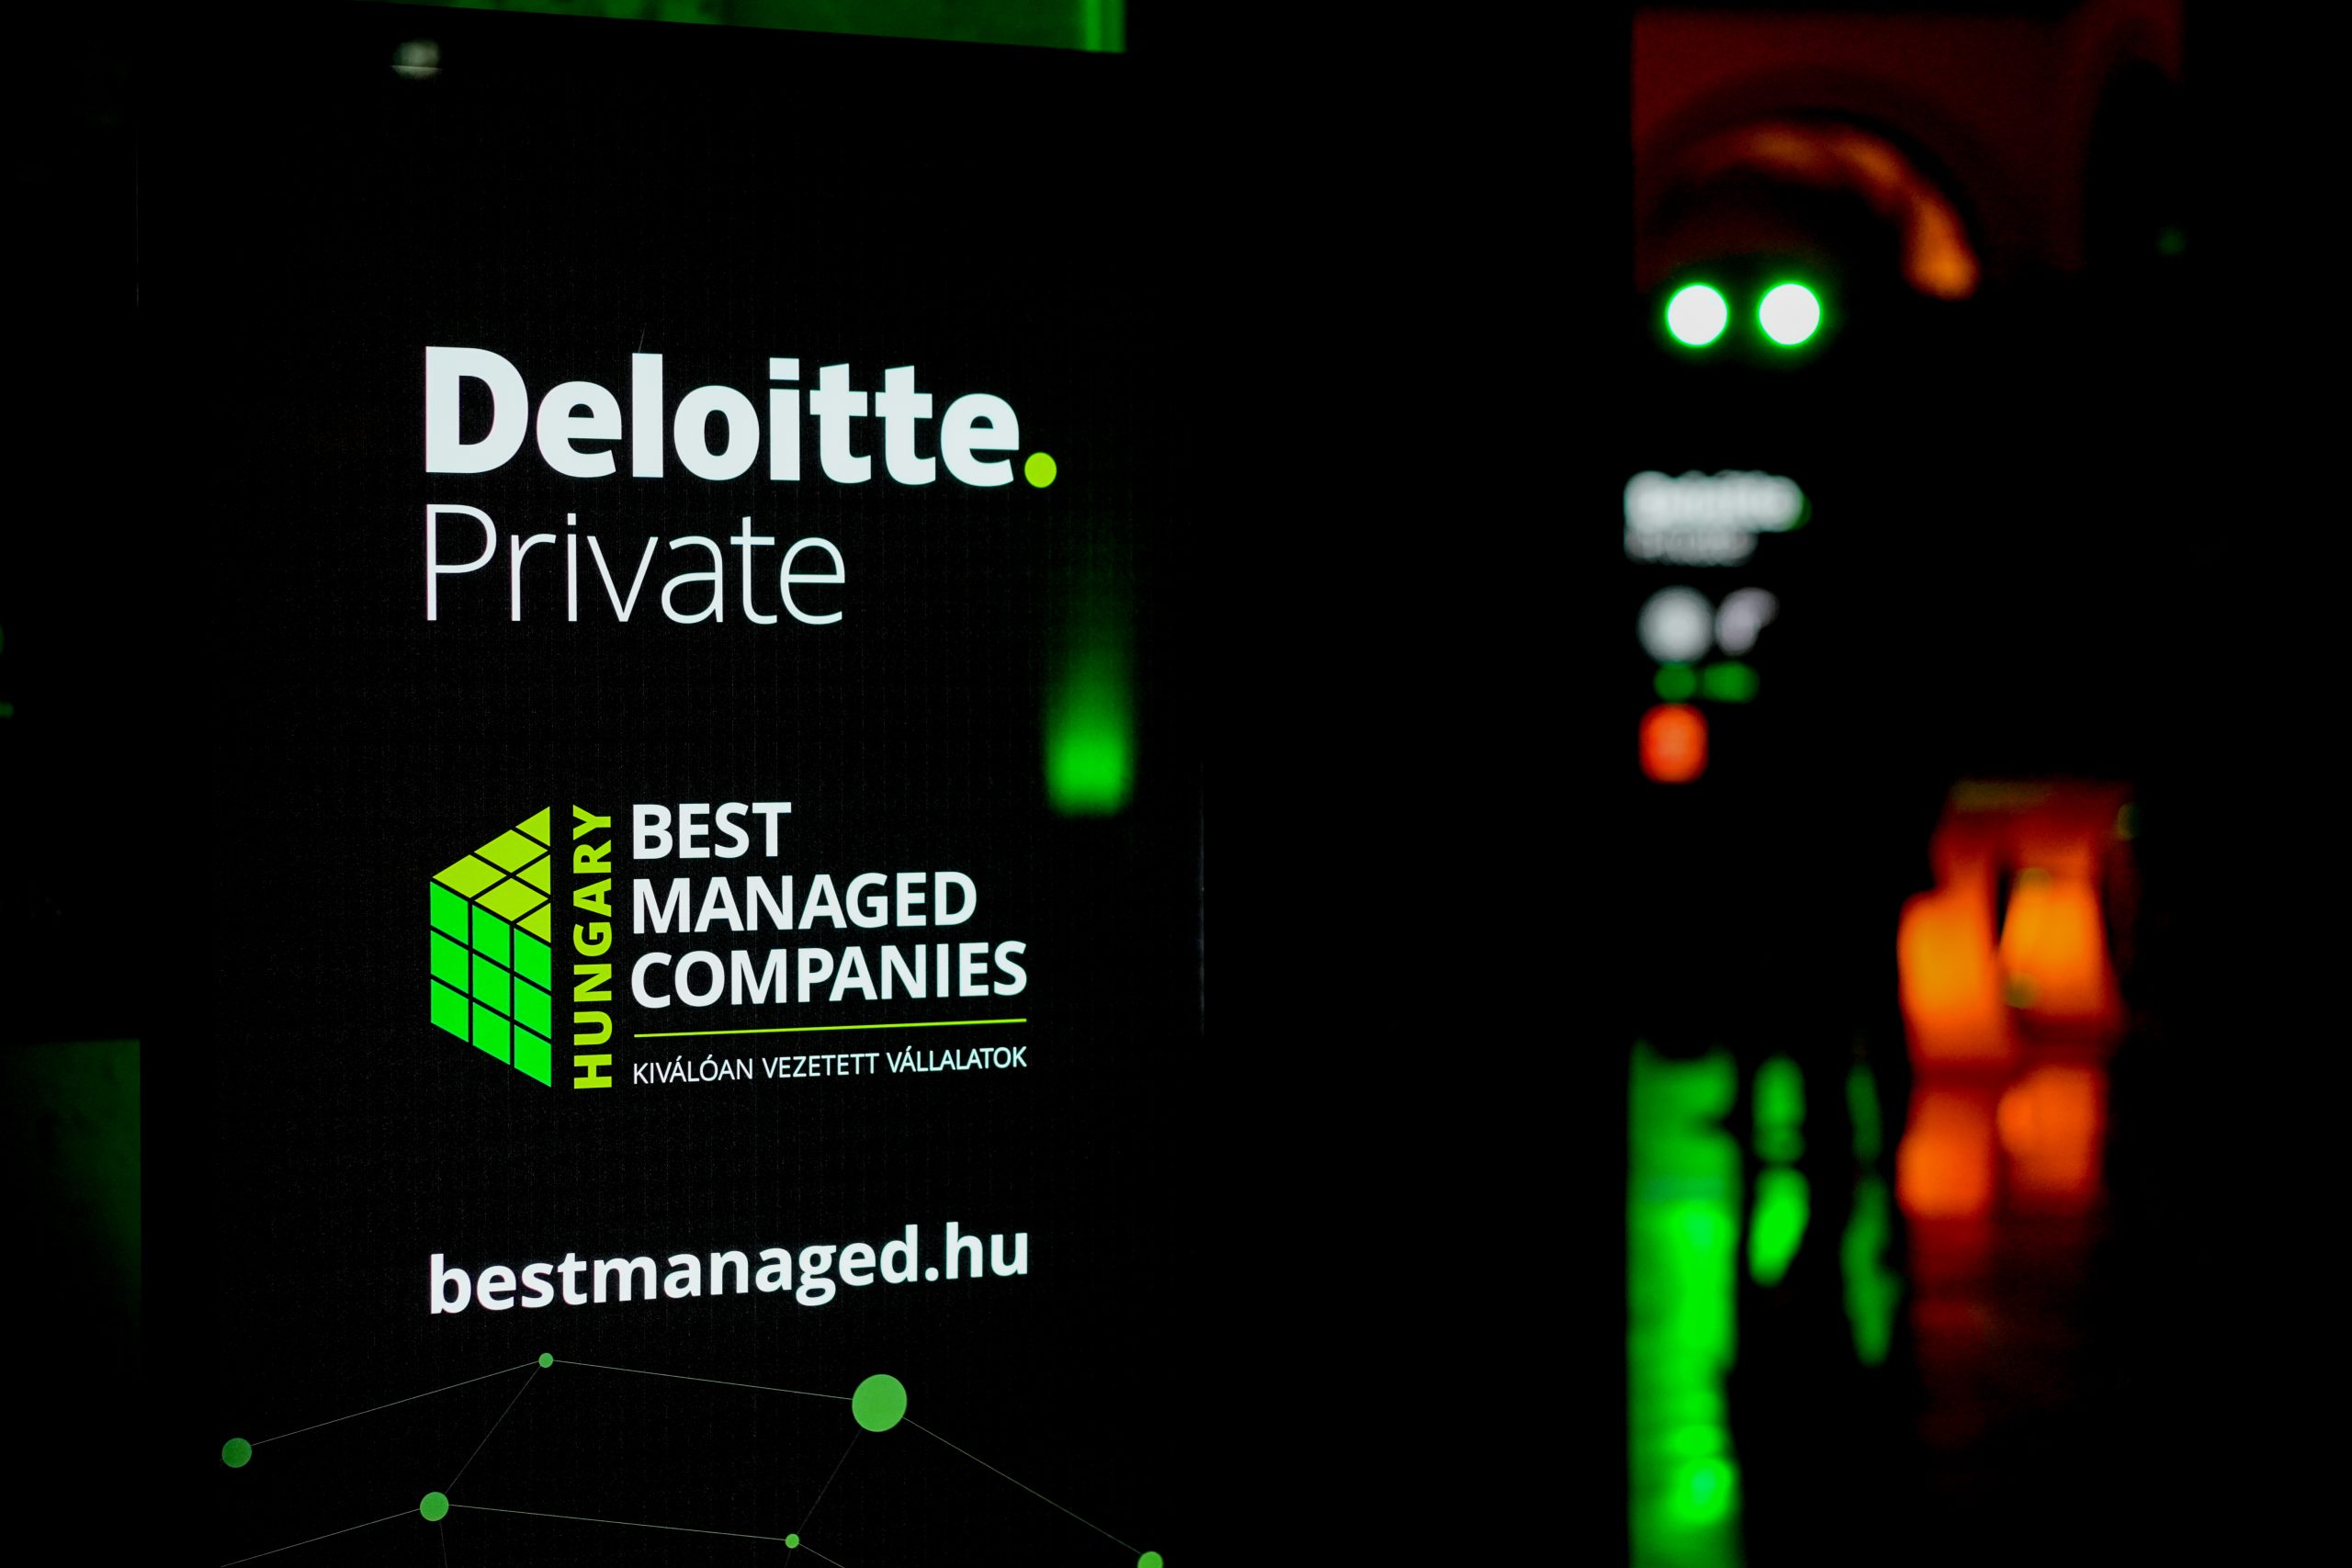 Dorsum receives “Best Managed Company” 2023 award from Deloitte.Private